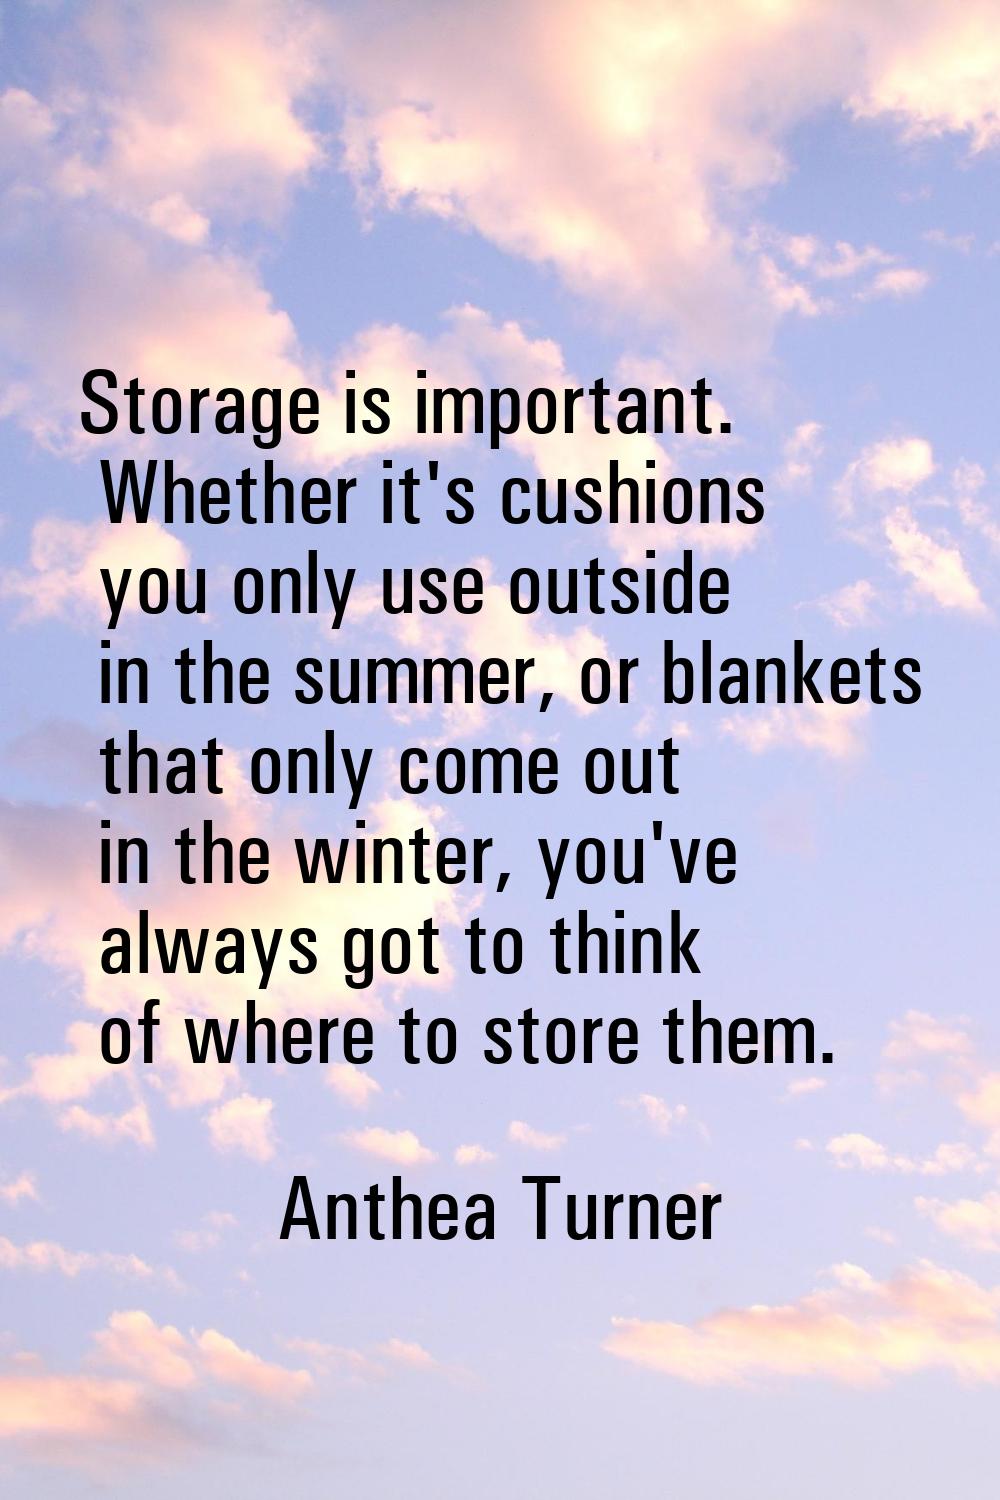 Storage is important. Whether it's cushions you only use outside in the summer, or blankets that on